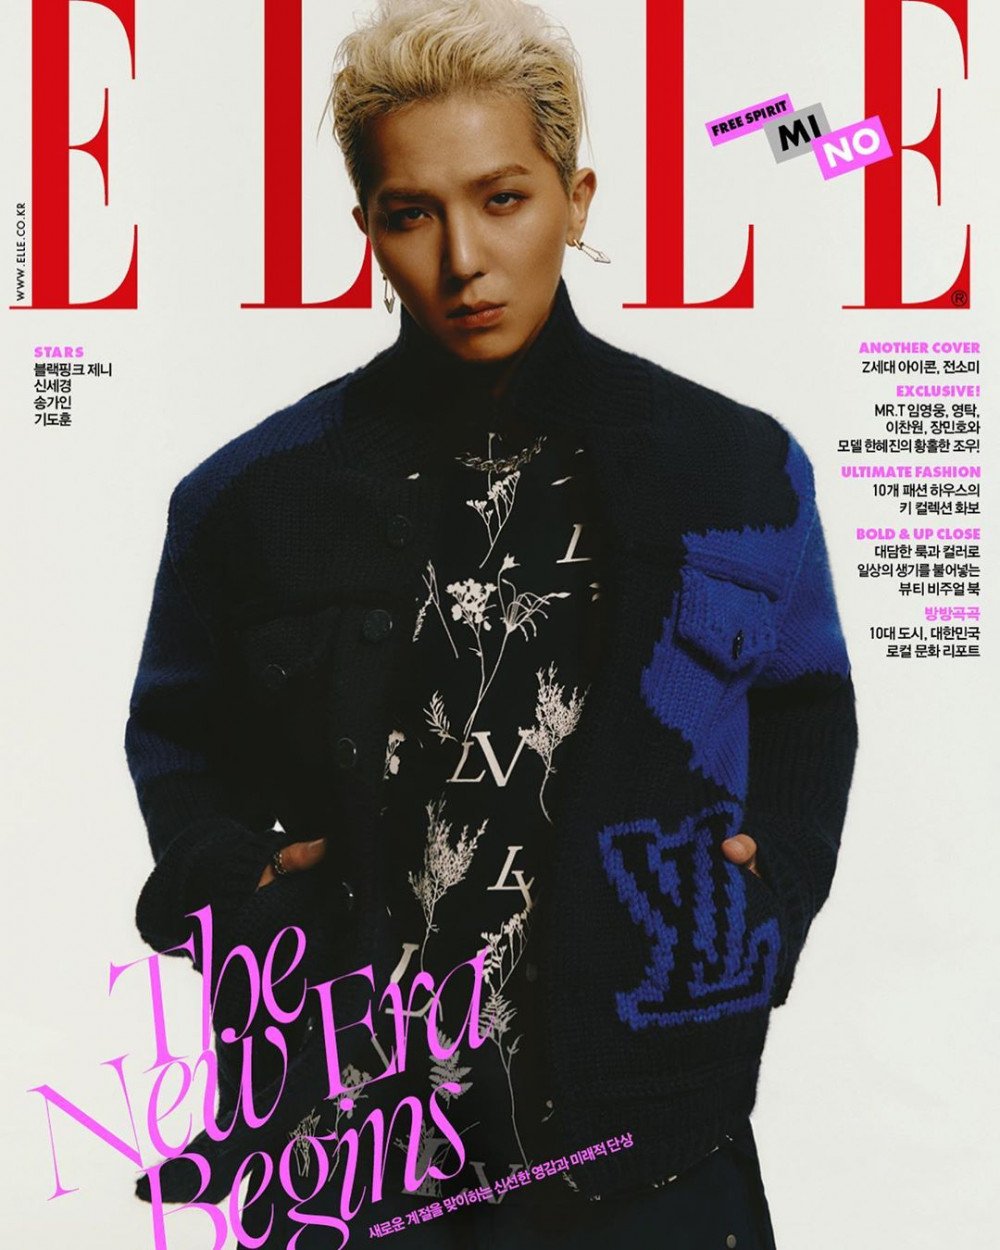 Song Min Ho & Jeon So Mi represent new age fashion icons as dual 'Elle'  cover models